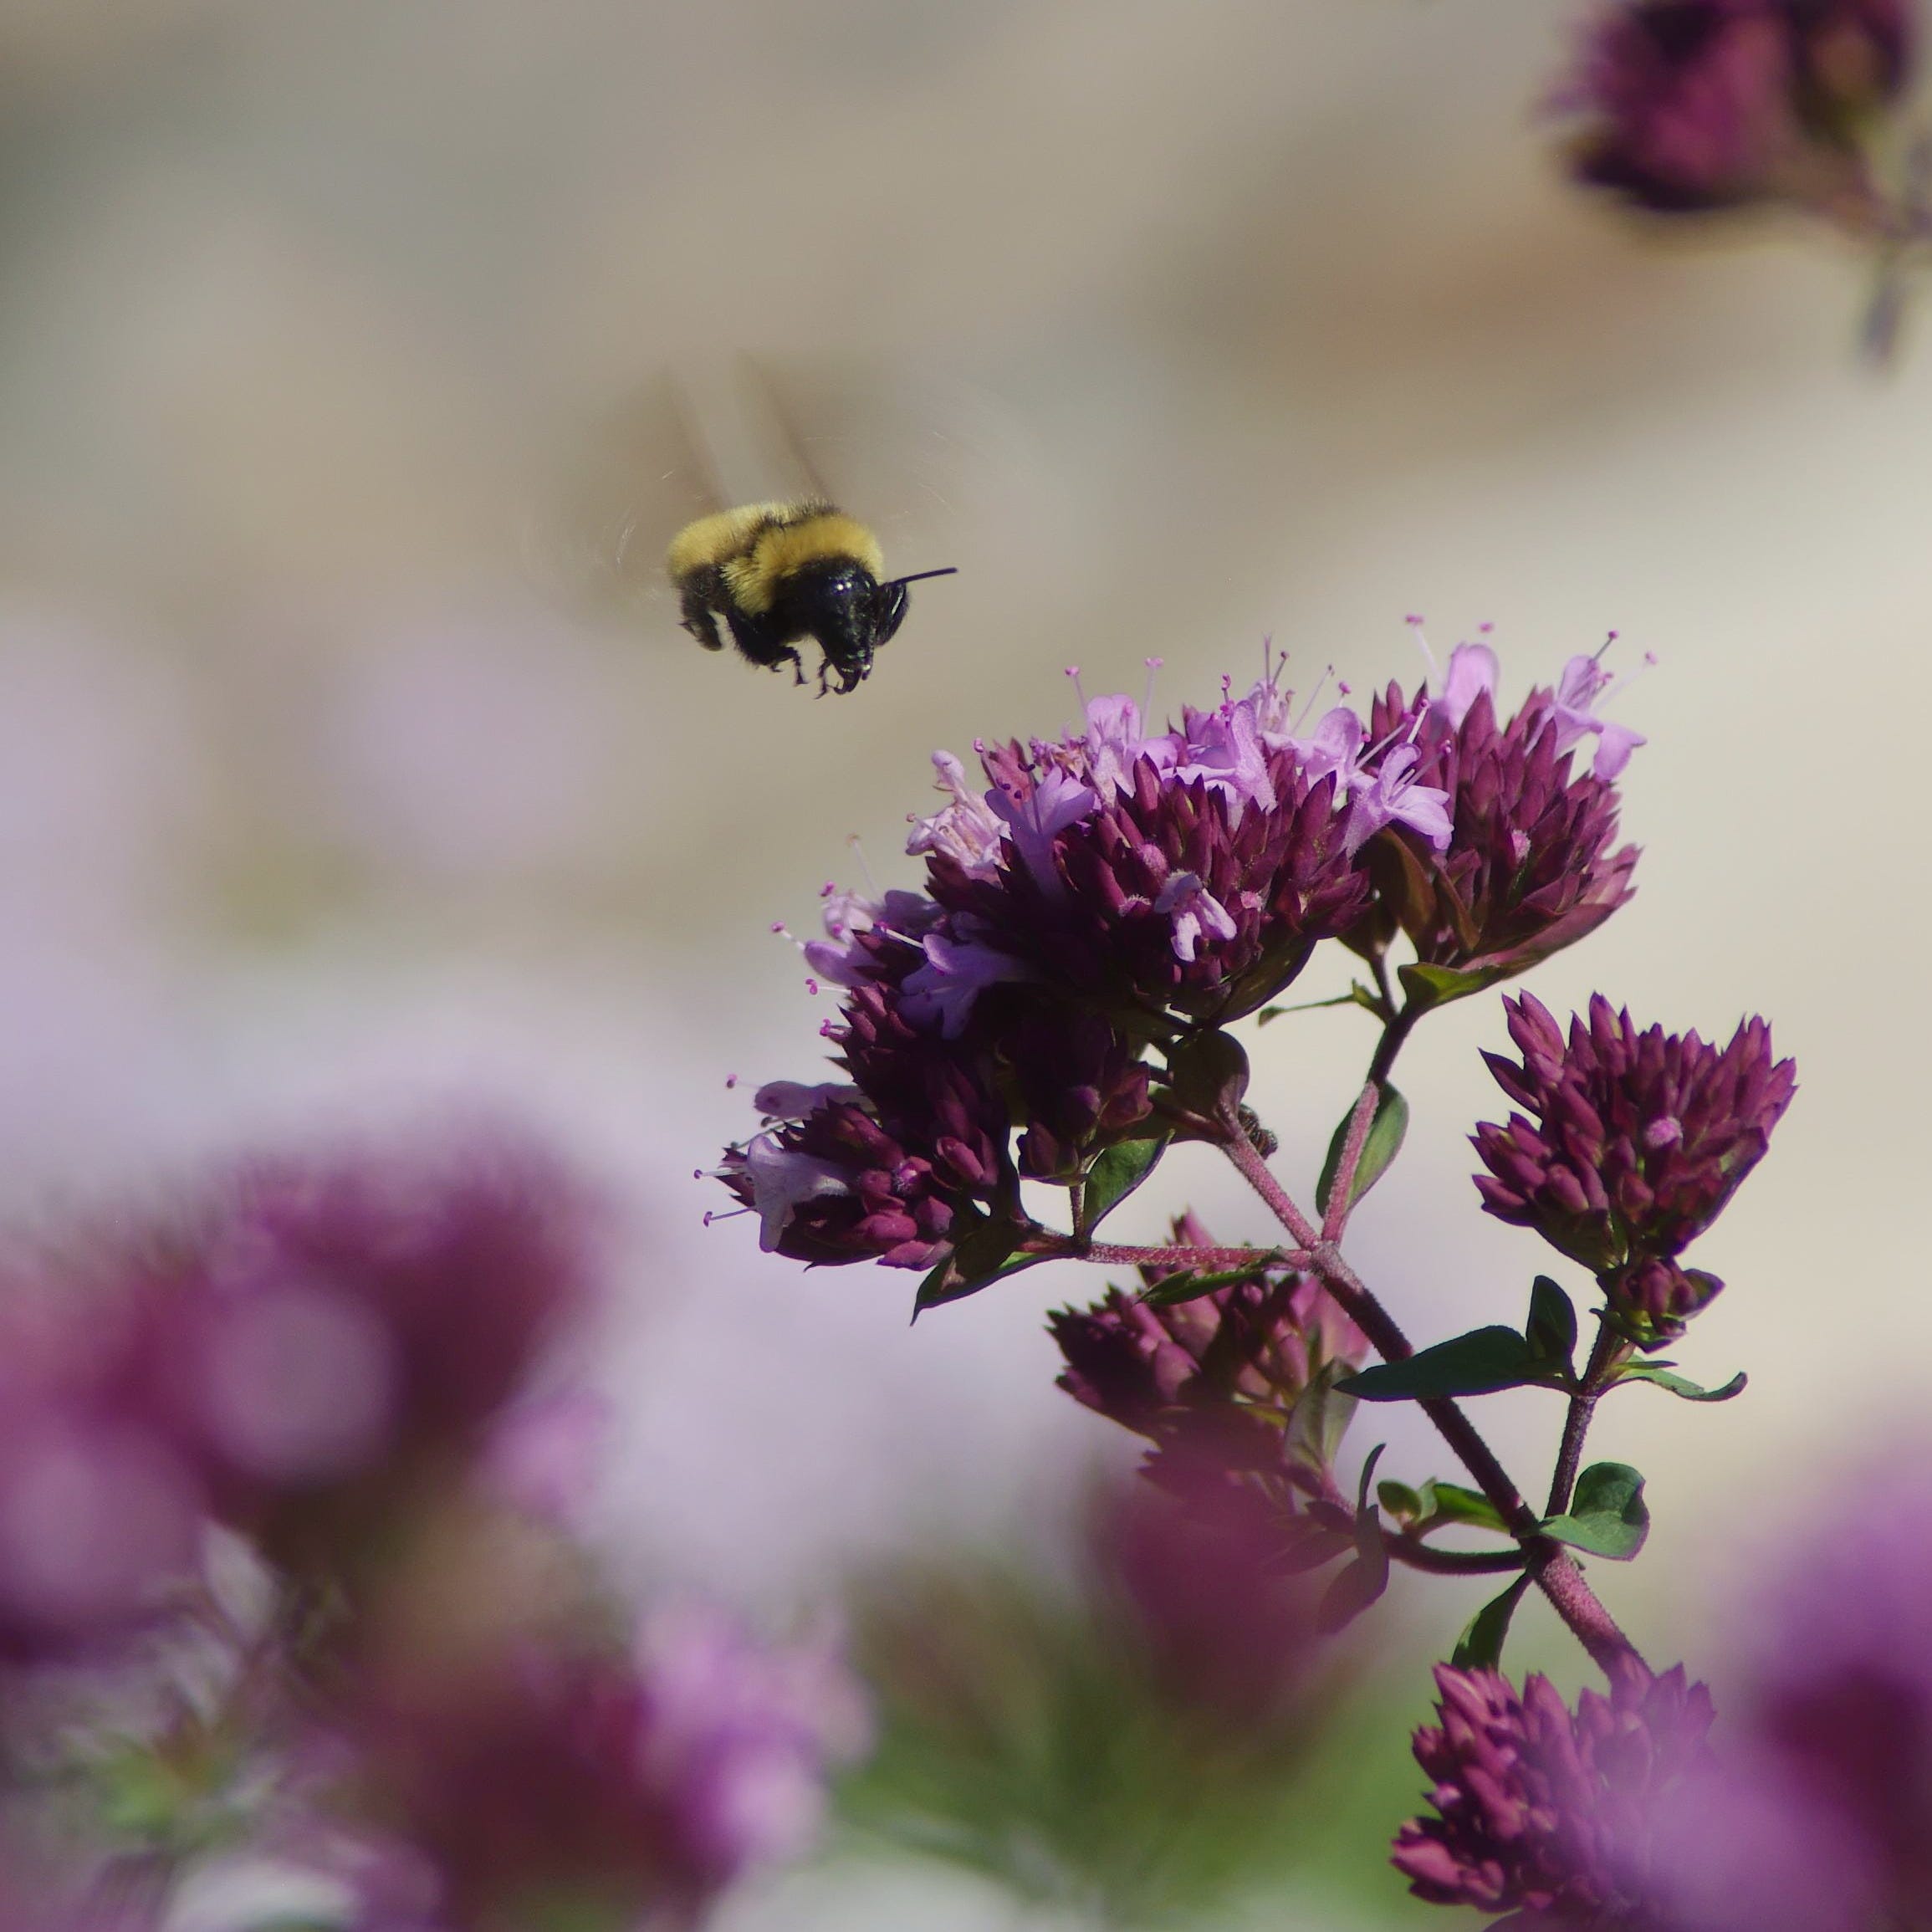 Origanum and Bee. Photo by Emmis Oure.